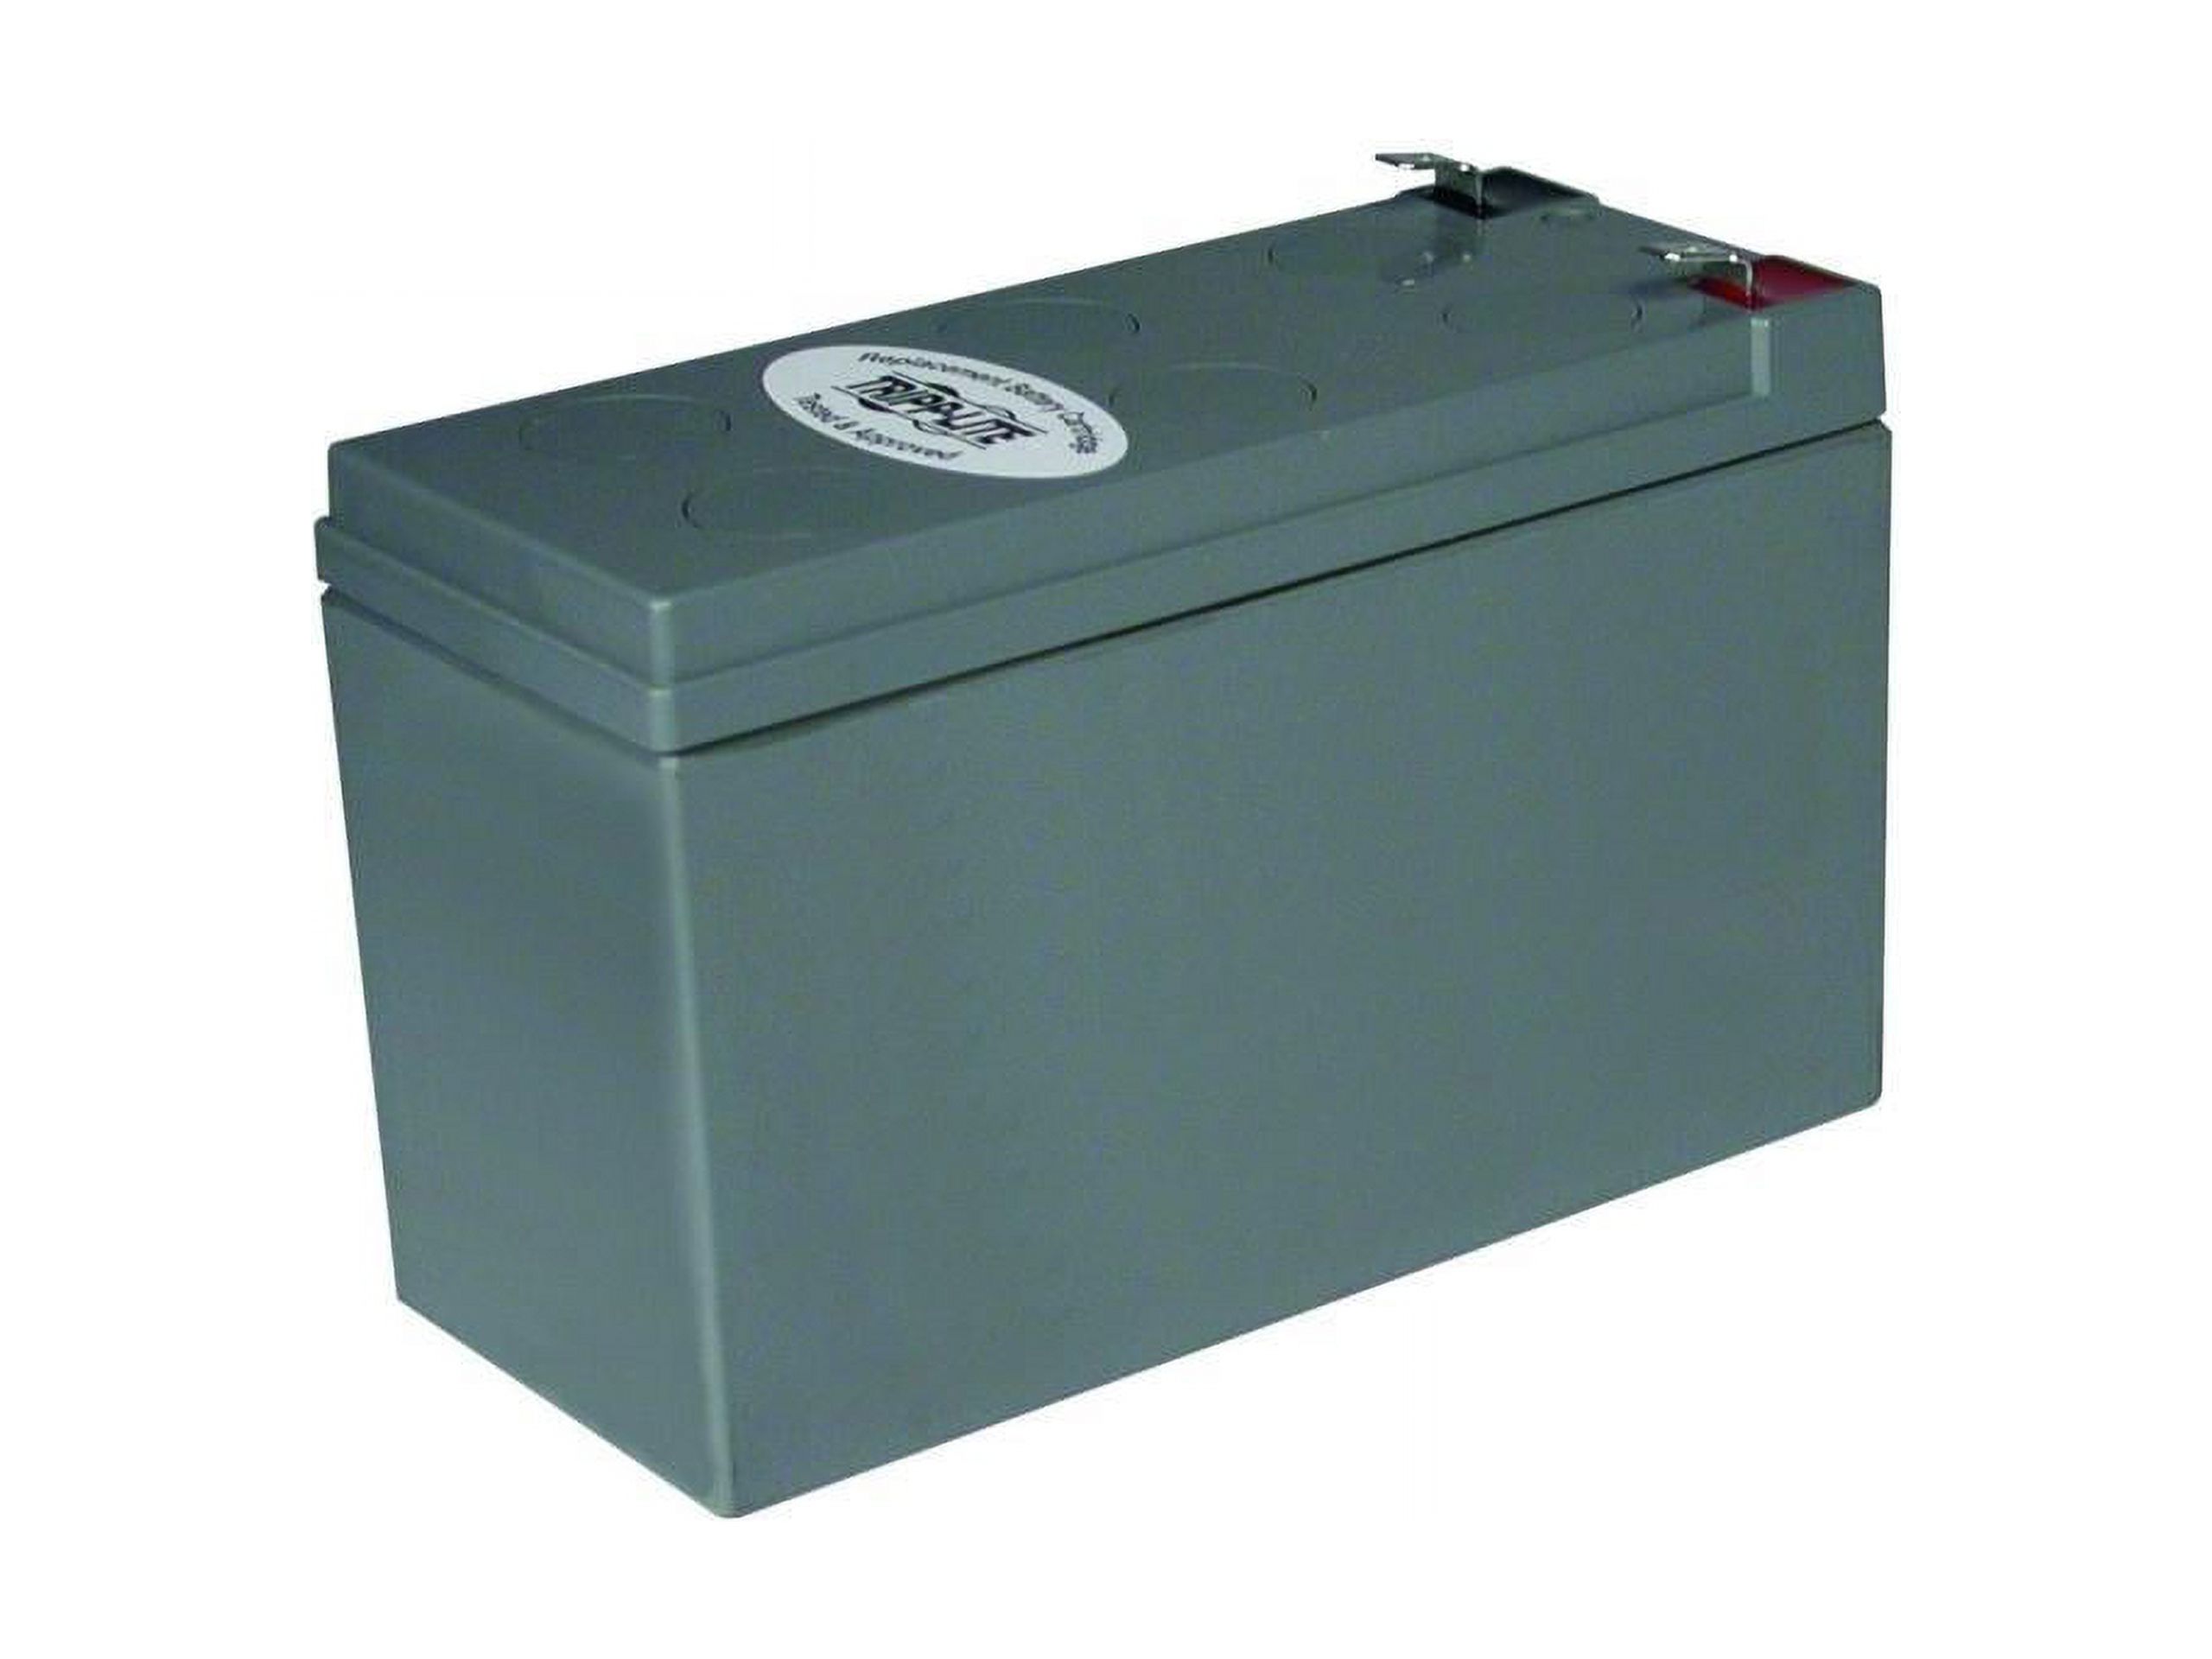 TRIPP LITE RBC51 UPS Replacement Battery Cartridge - image 1 of 2